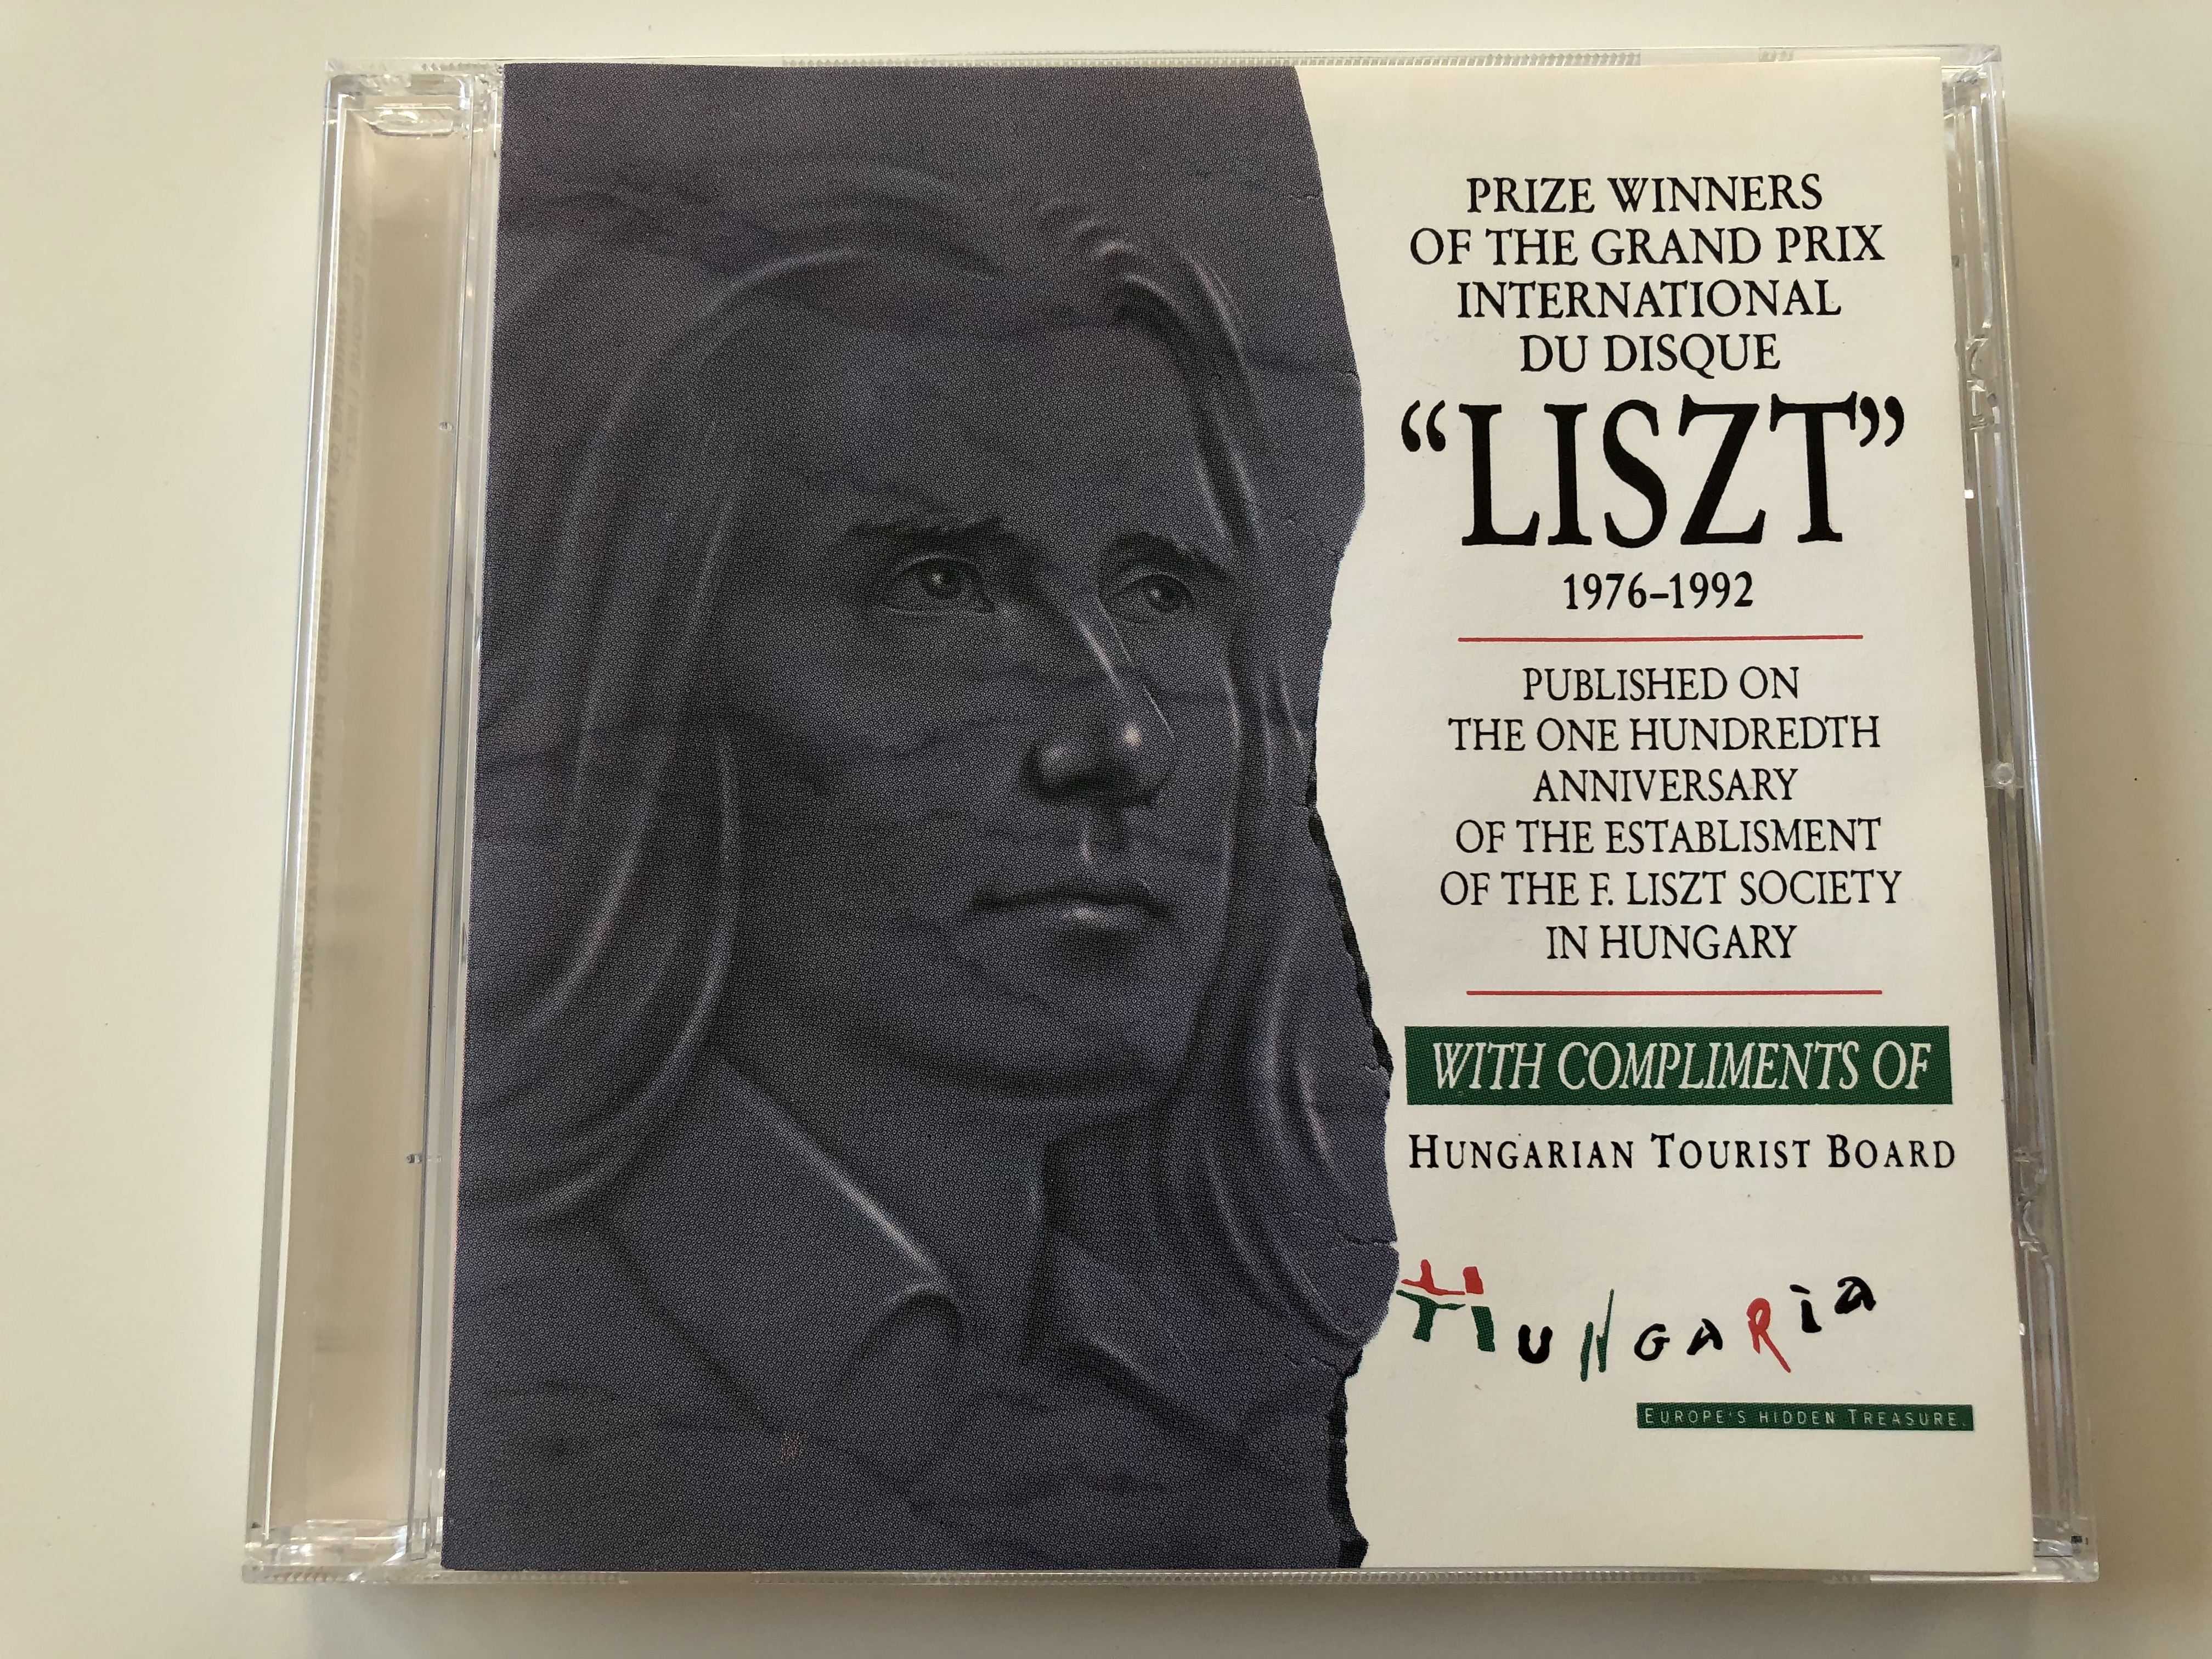 prize-winners-of-the-grand-prix-international-du-disque-liszt-1976-1992-published-on-the-one-hundredth-anniversary-of-the-establisment-of-the-f.-liszt-society-in-hungary-hungaroton-aud-1-.jpg